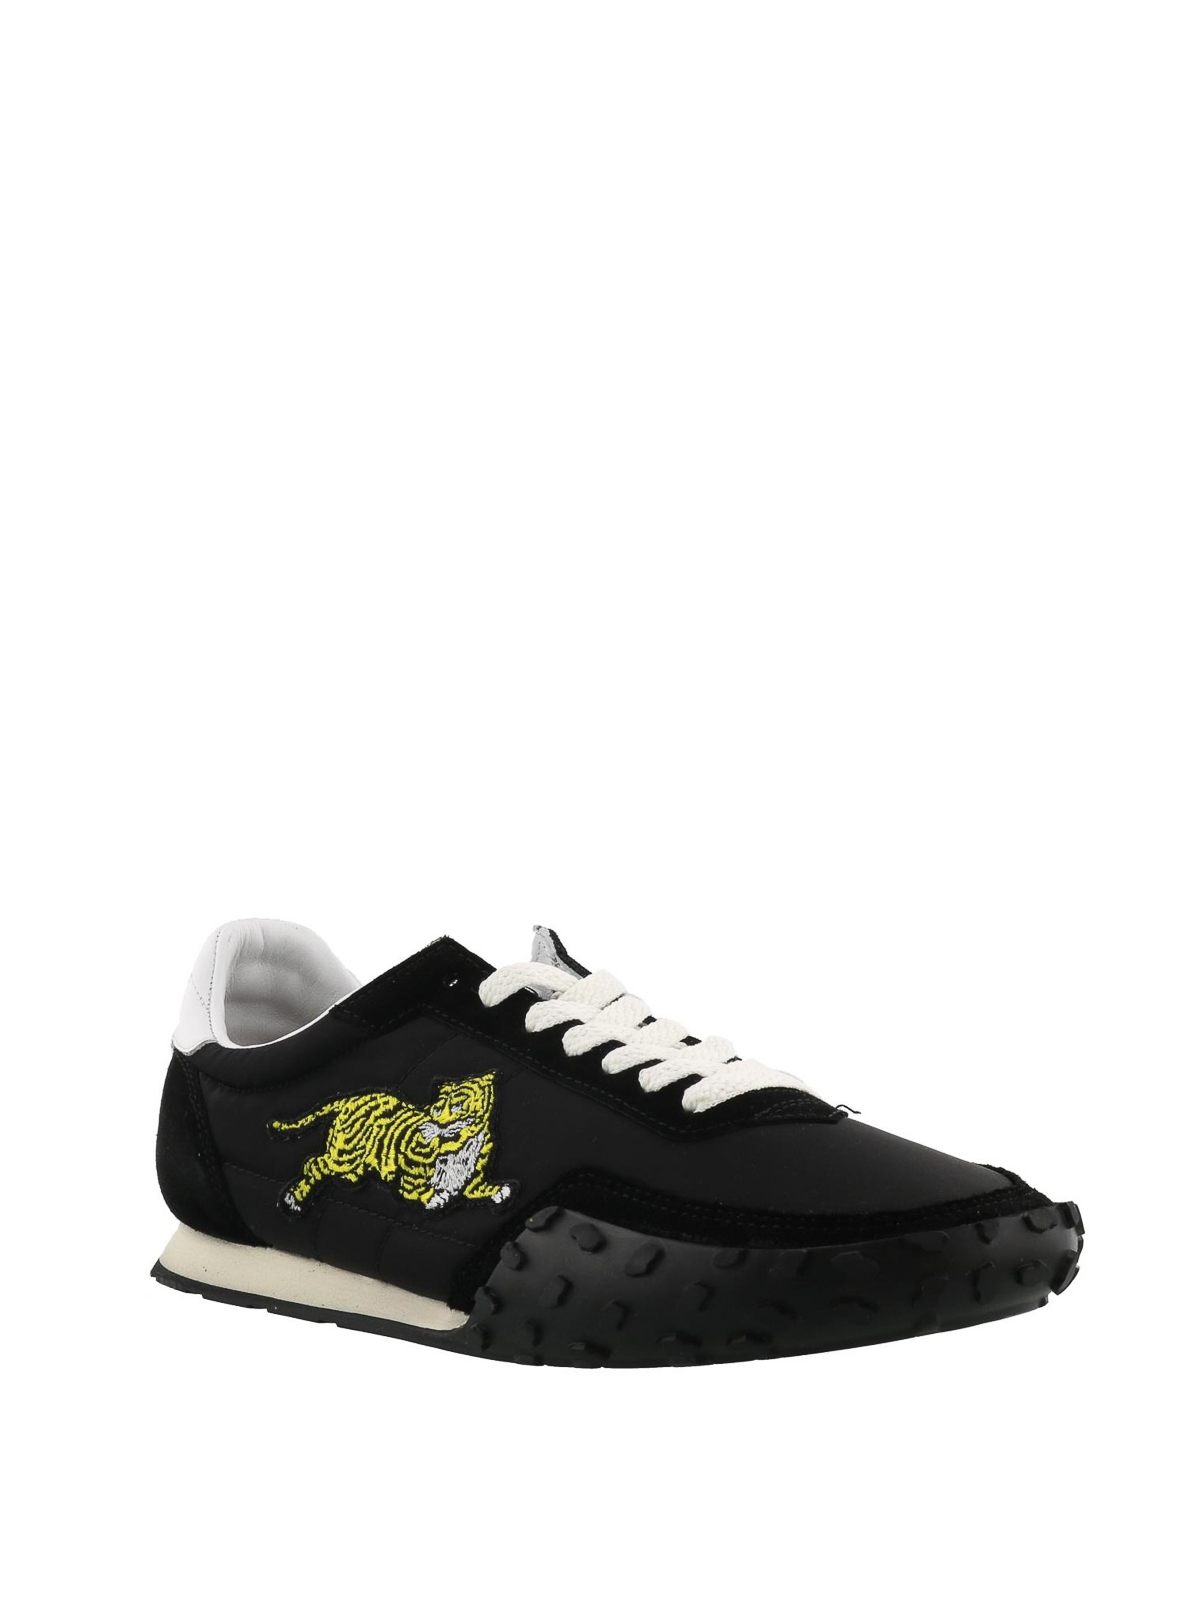 kenzo move tiger trainers